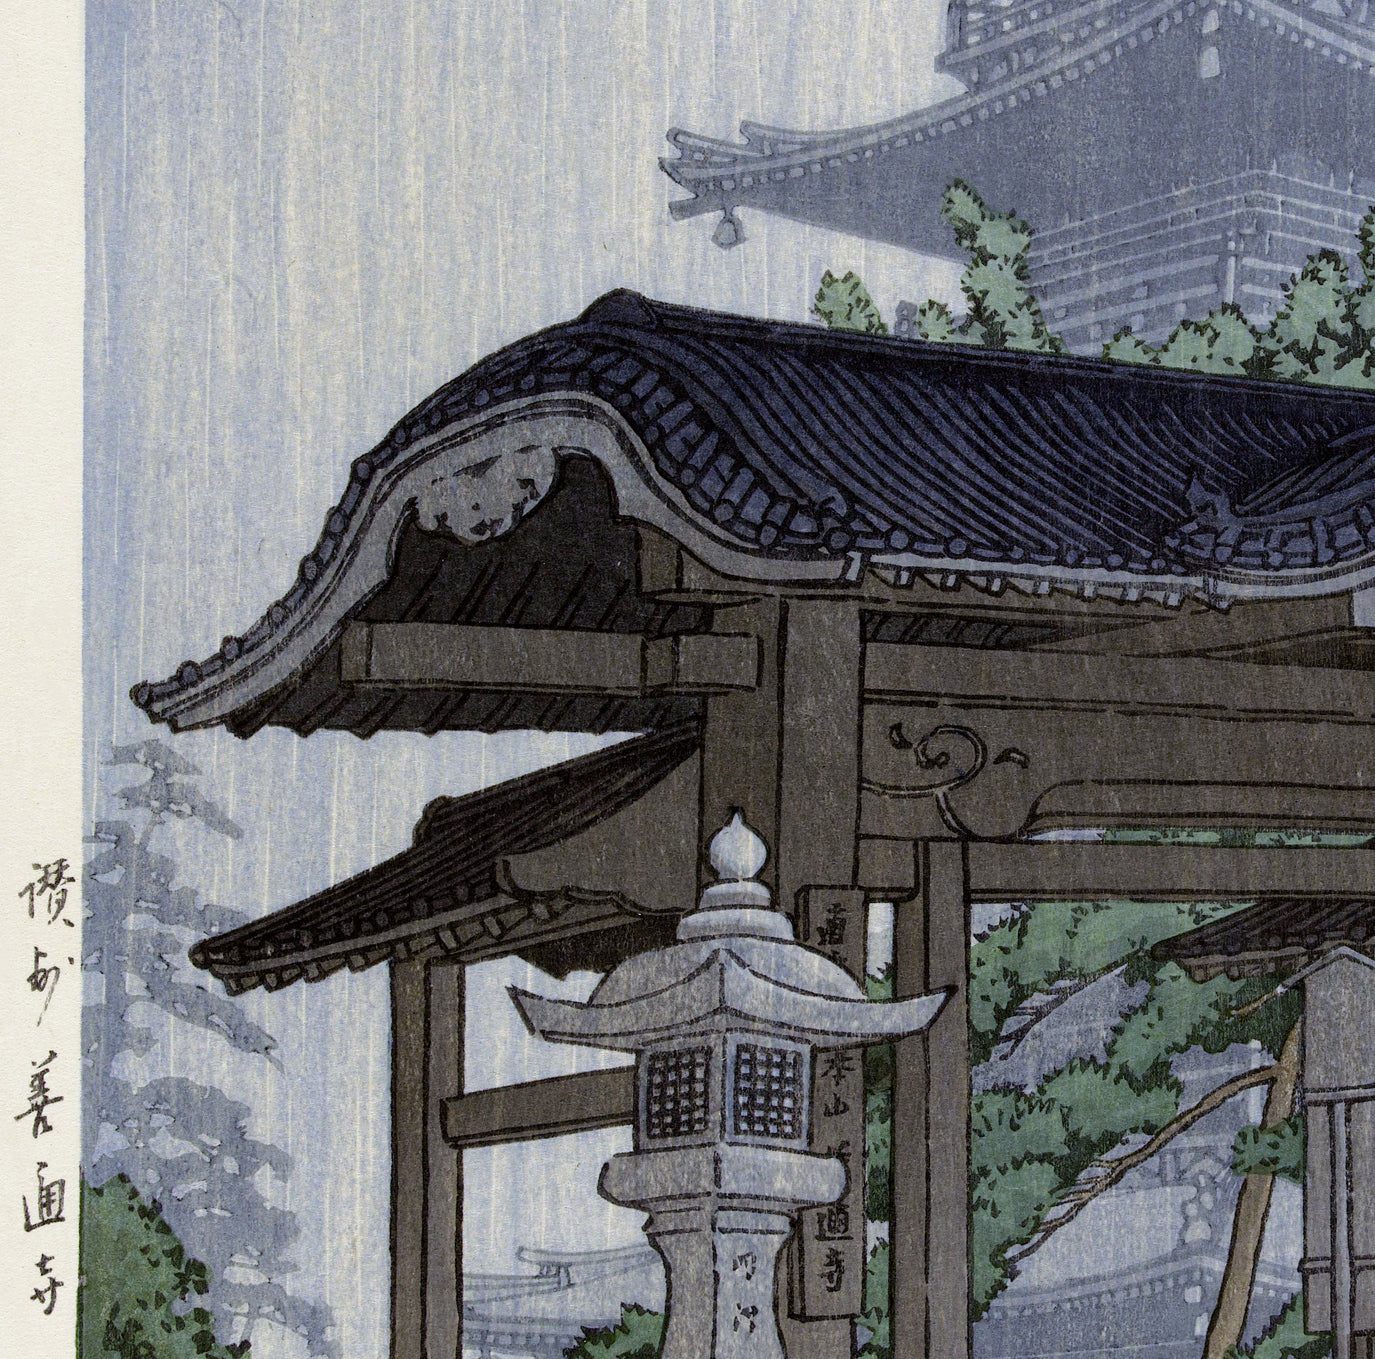 The Zensetsu Temple in Sanshu by Hasui Poster